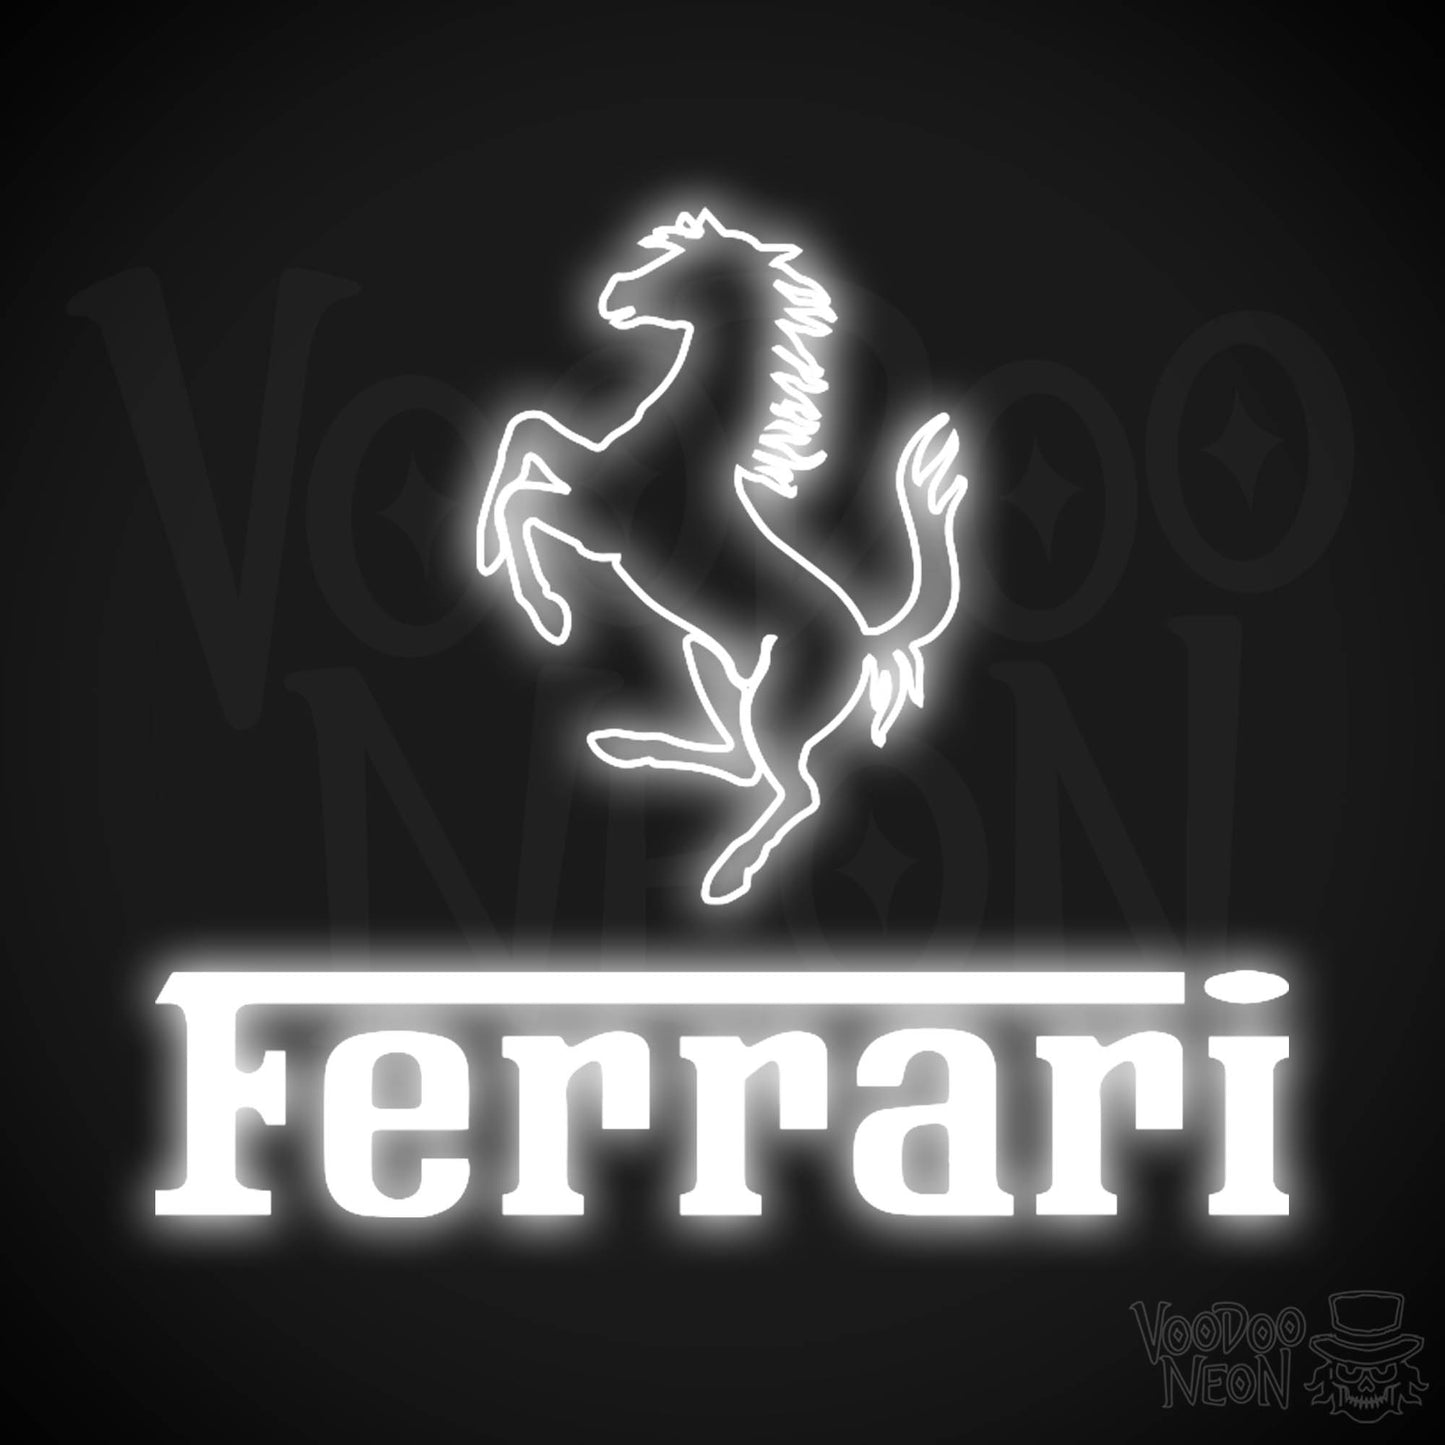 Ferrari Neon Sign - Neon Ferrari Sign - Ferrari Logo Wall Art - Color White